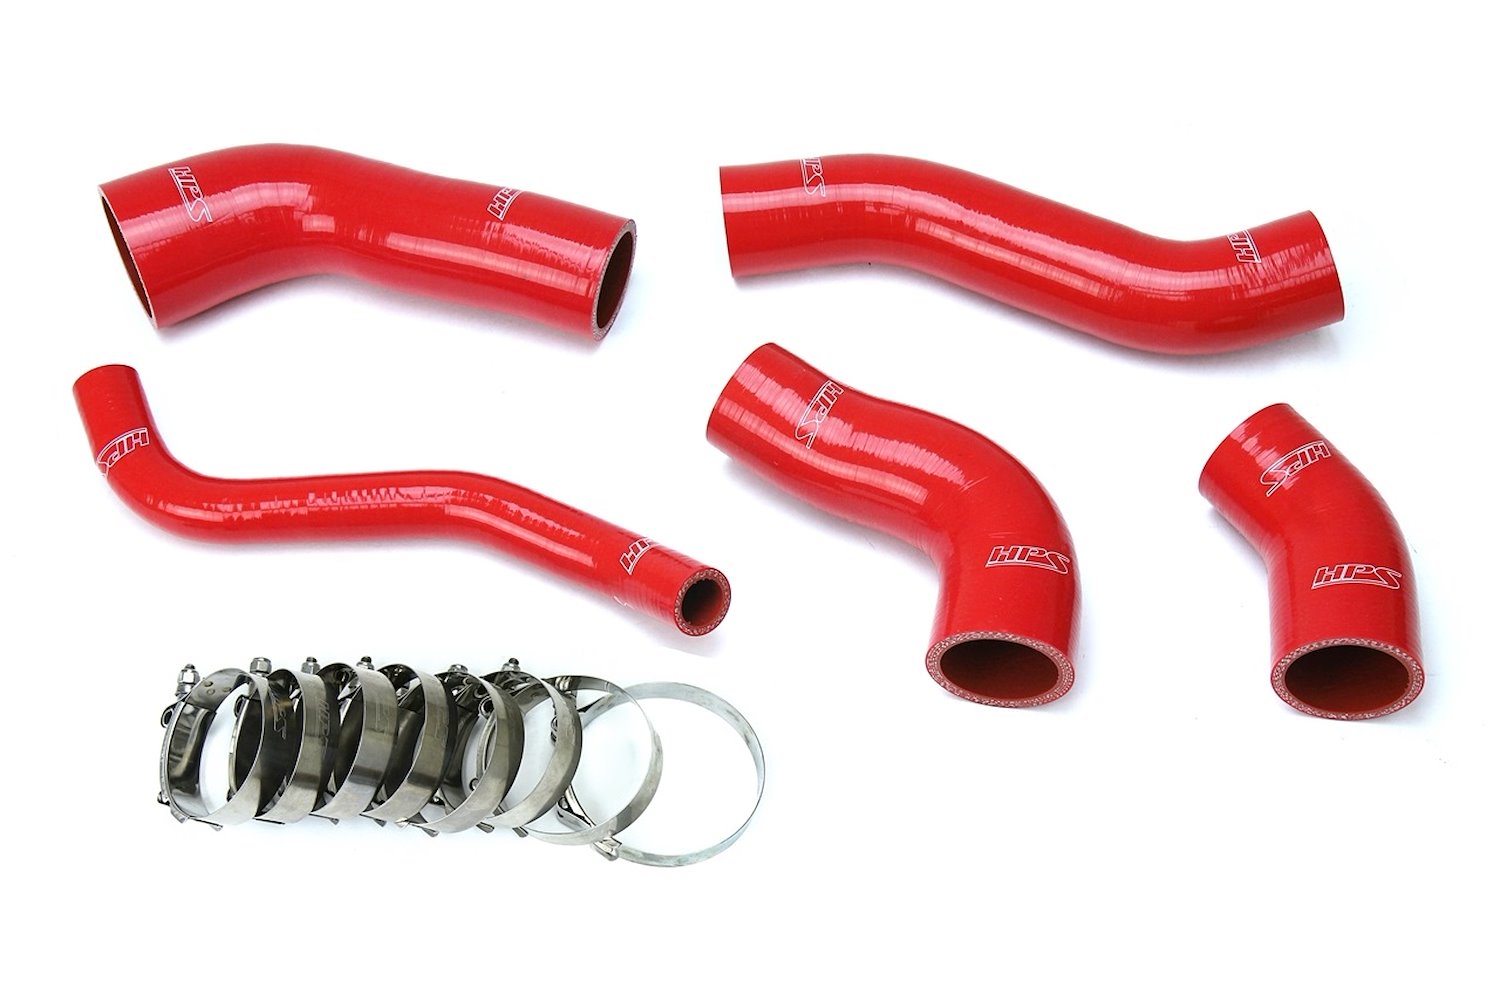 57-1629-RED Intercooler Hose Kit, High-Temp 4-Ply Reinforced Silicone, Replace OEM Rubber Intercooler Turbo Boots